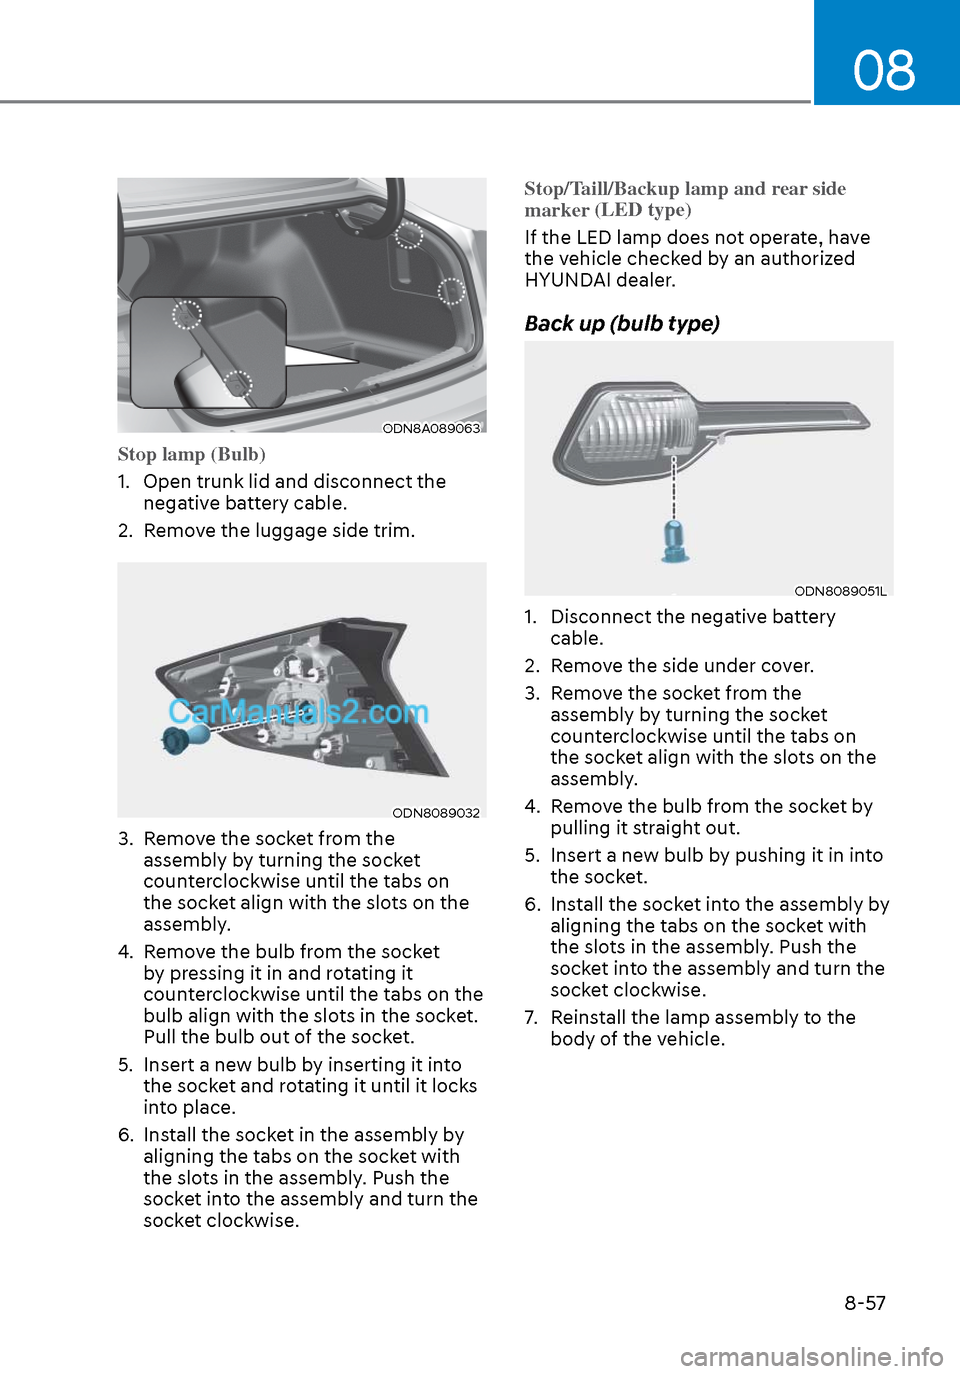 Hyundai Sonata 2020  Owners Manual 08
8-57
ODN8A089063ODN8A089063
Stop lamp (Bulb)
1.  Open trunk lid and disconnect the nega
 tive battery cable.
2.  Remove the luggage side trim.
ODN8089032ODN8089032
3.  Remove the socket from the  a